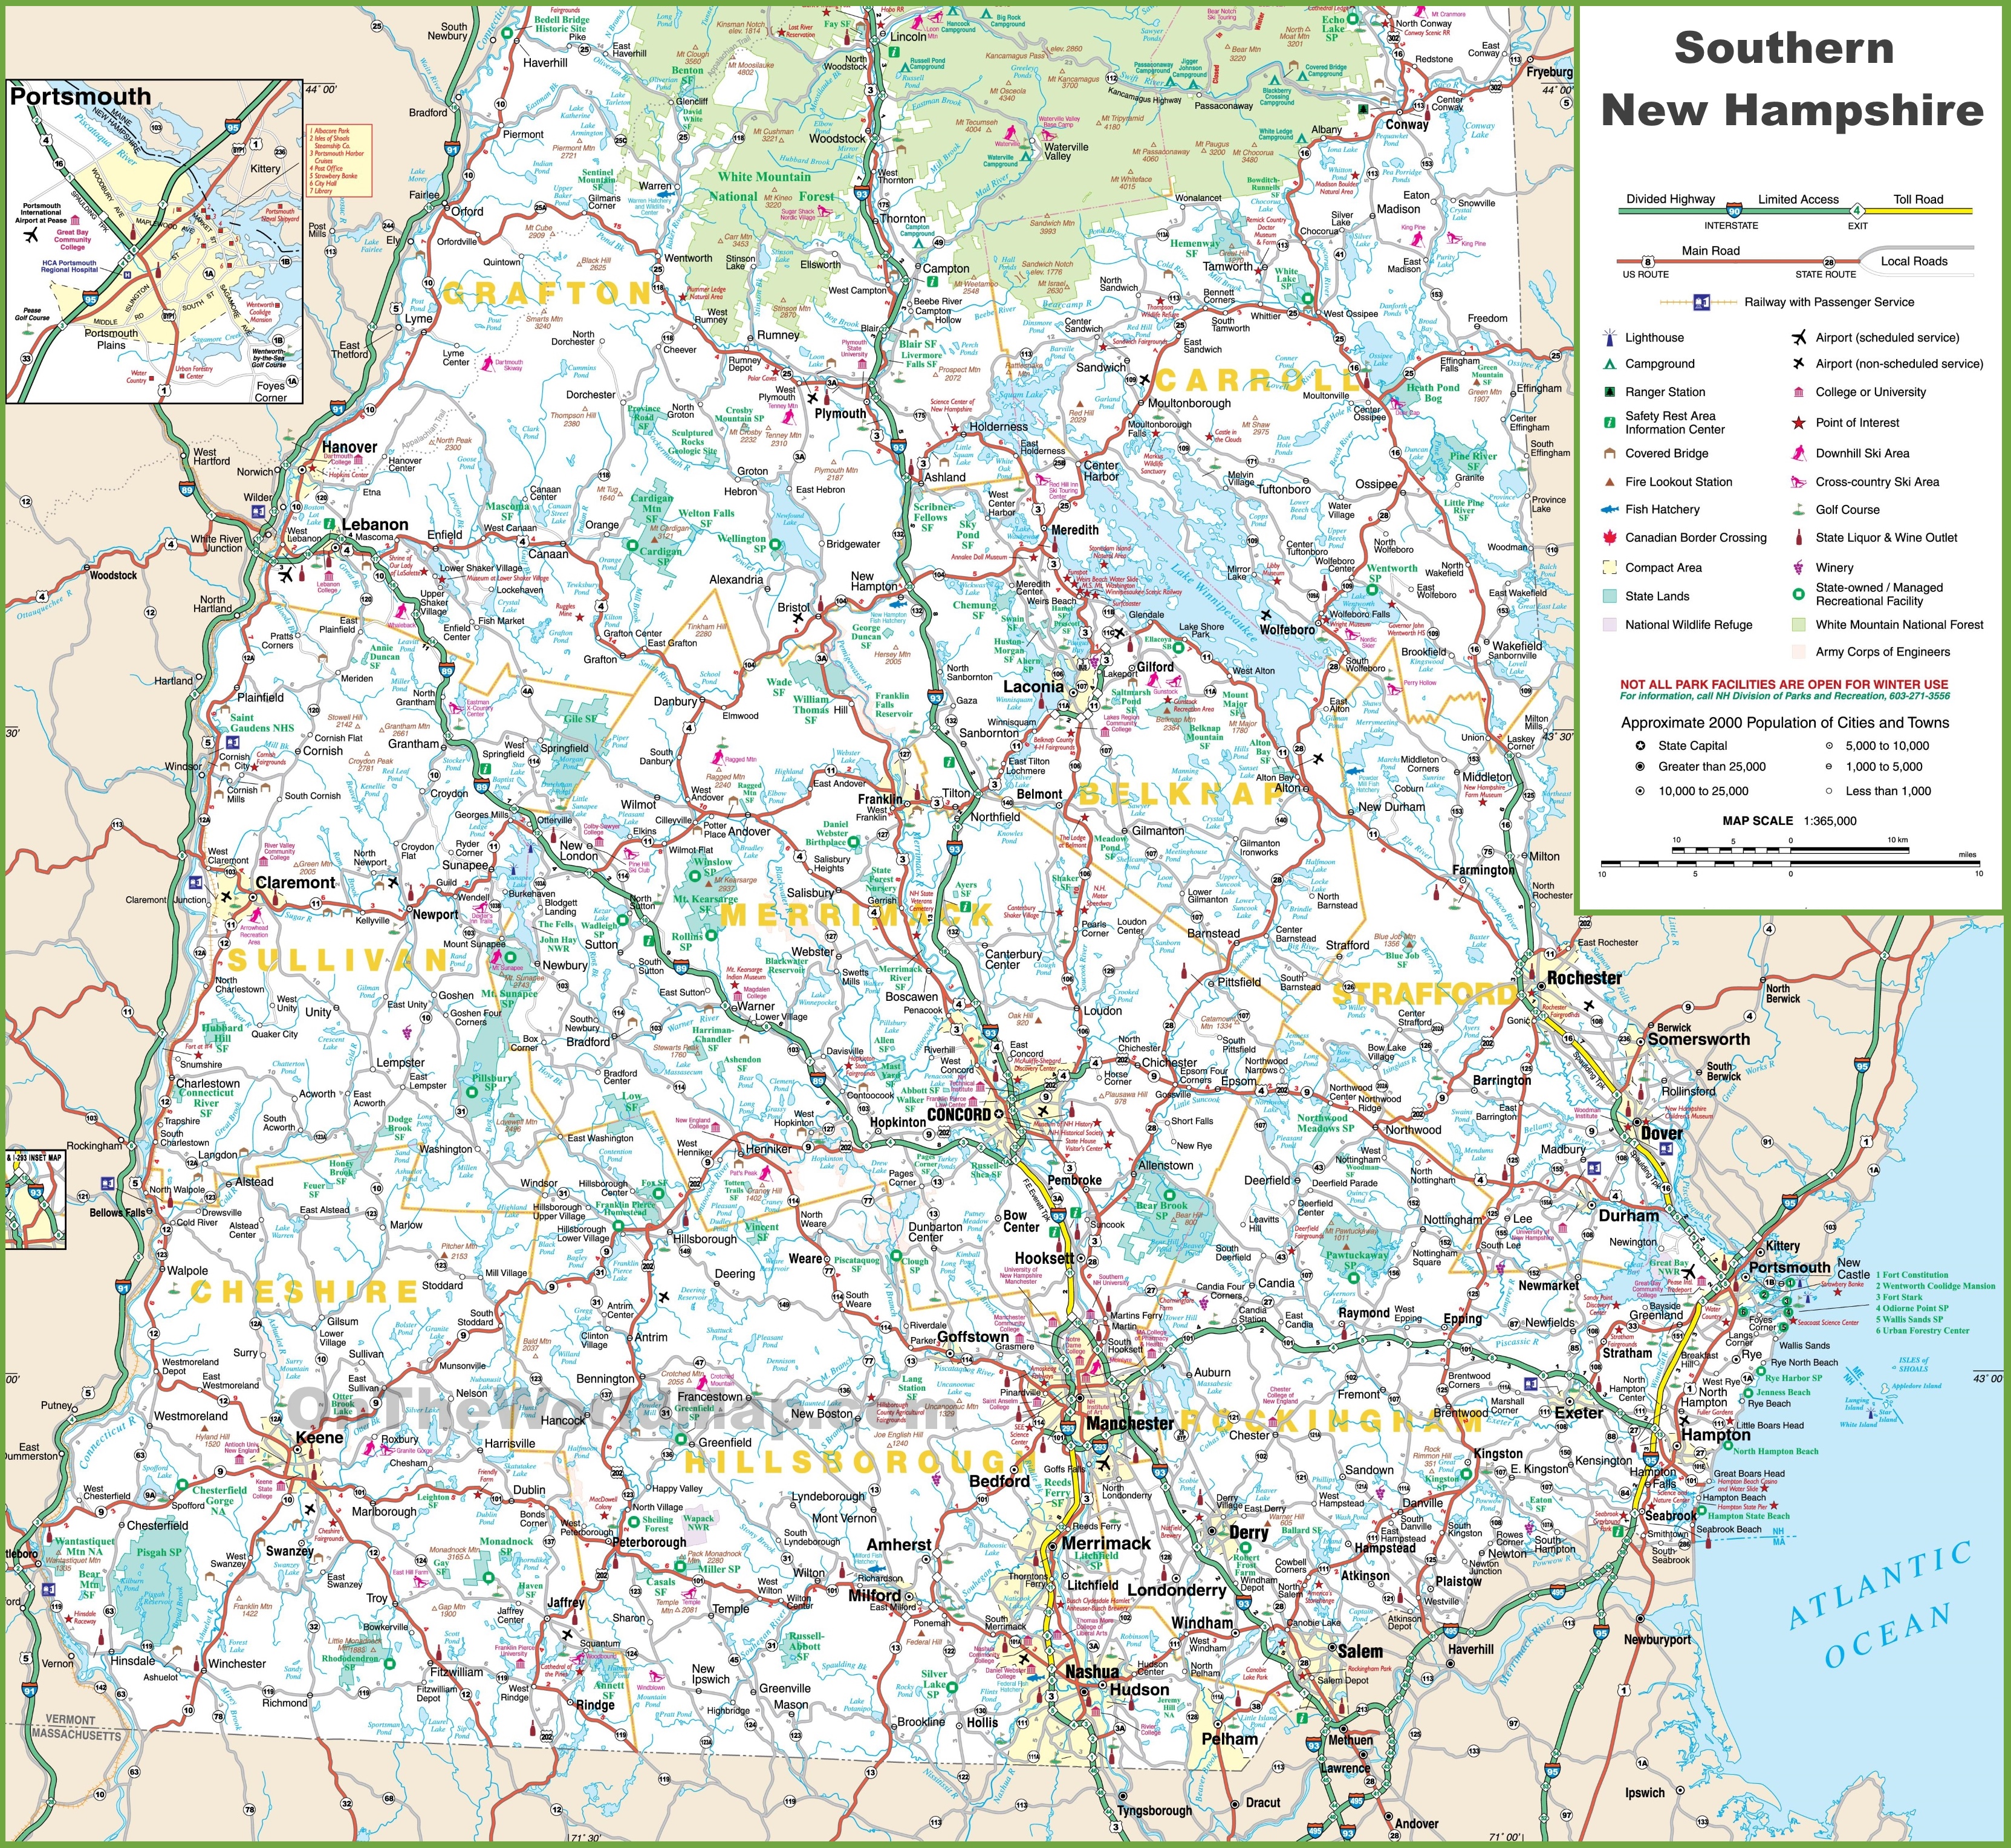 Map of Southern New Hampshire